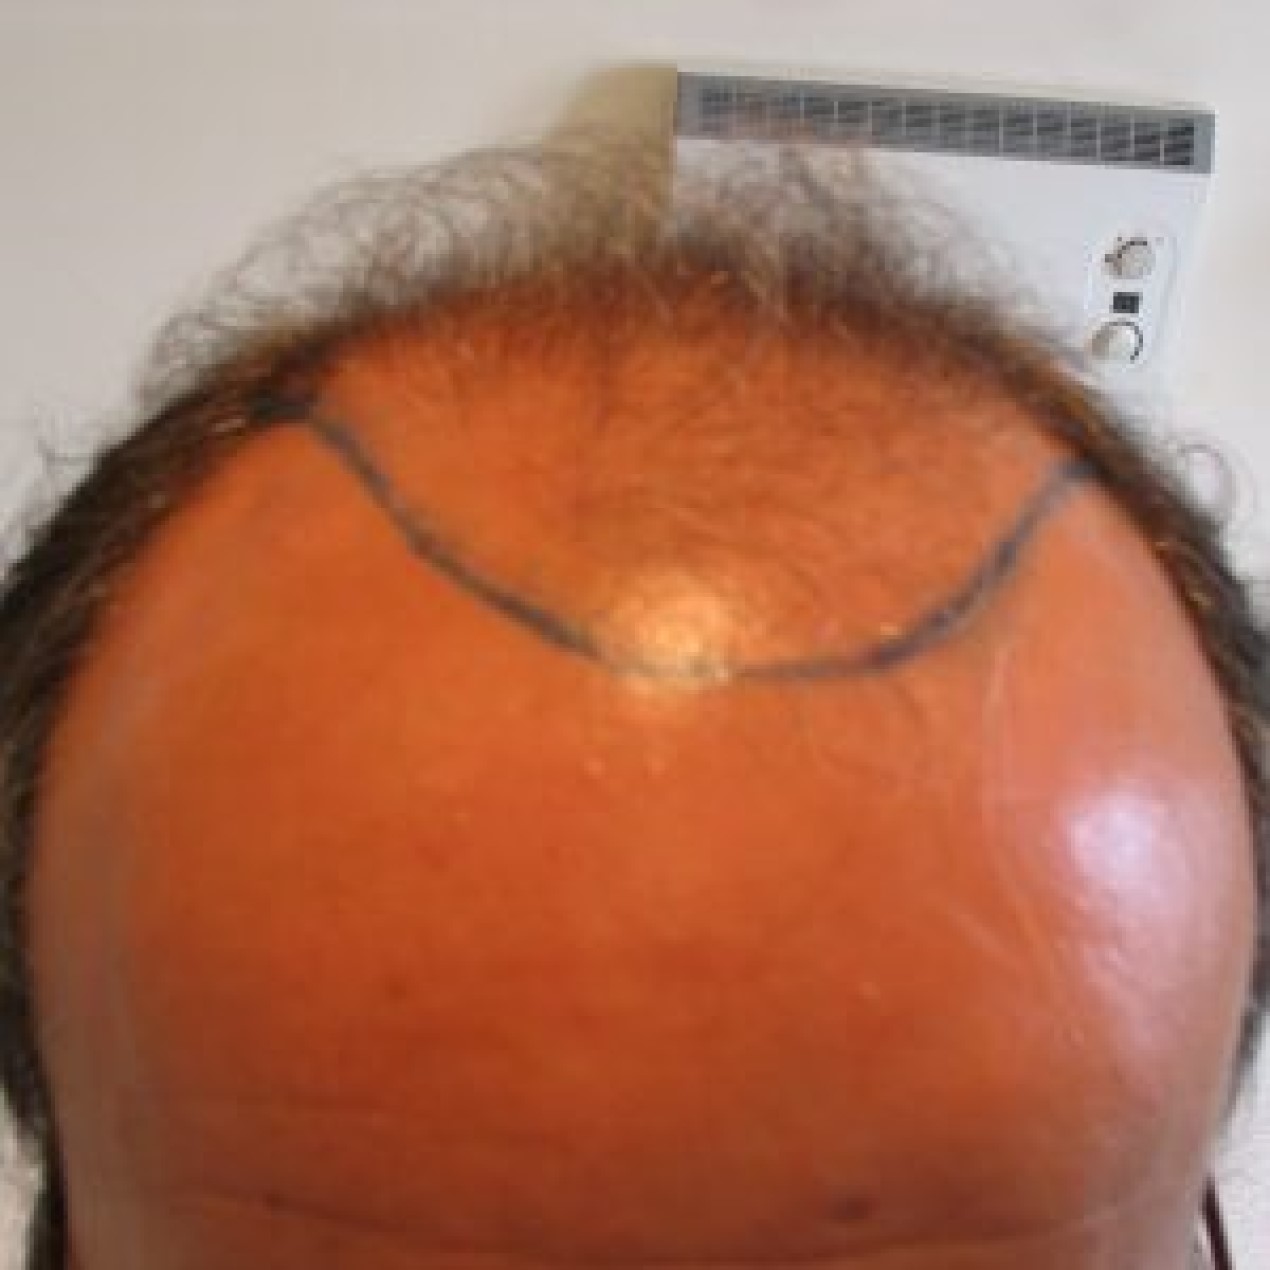 Hair Transplant After 3 Months: Photos, Results, Side Effects